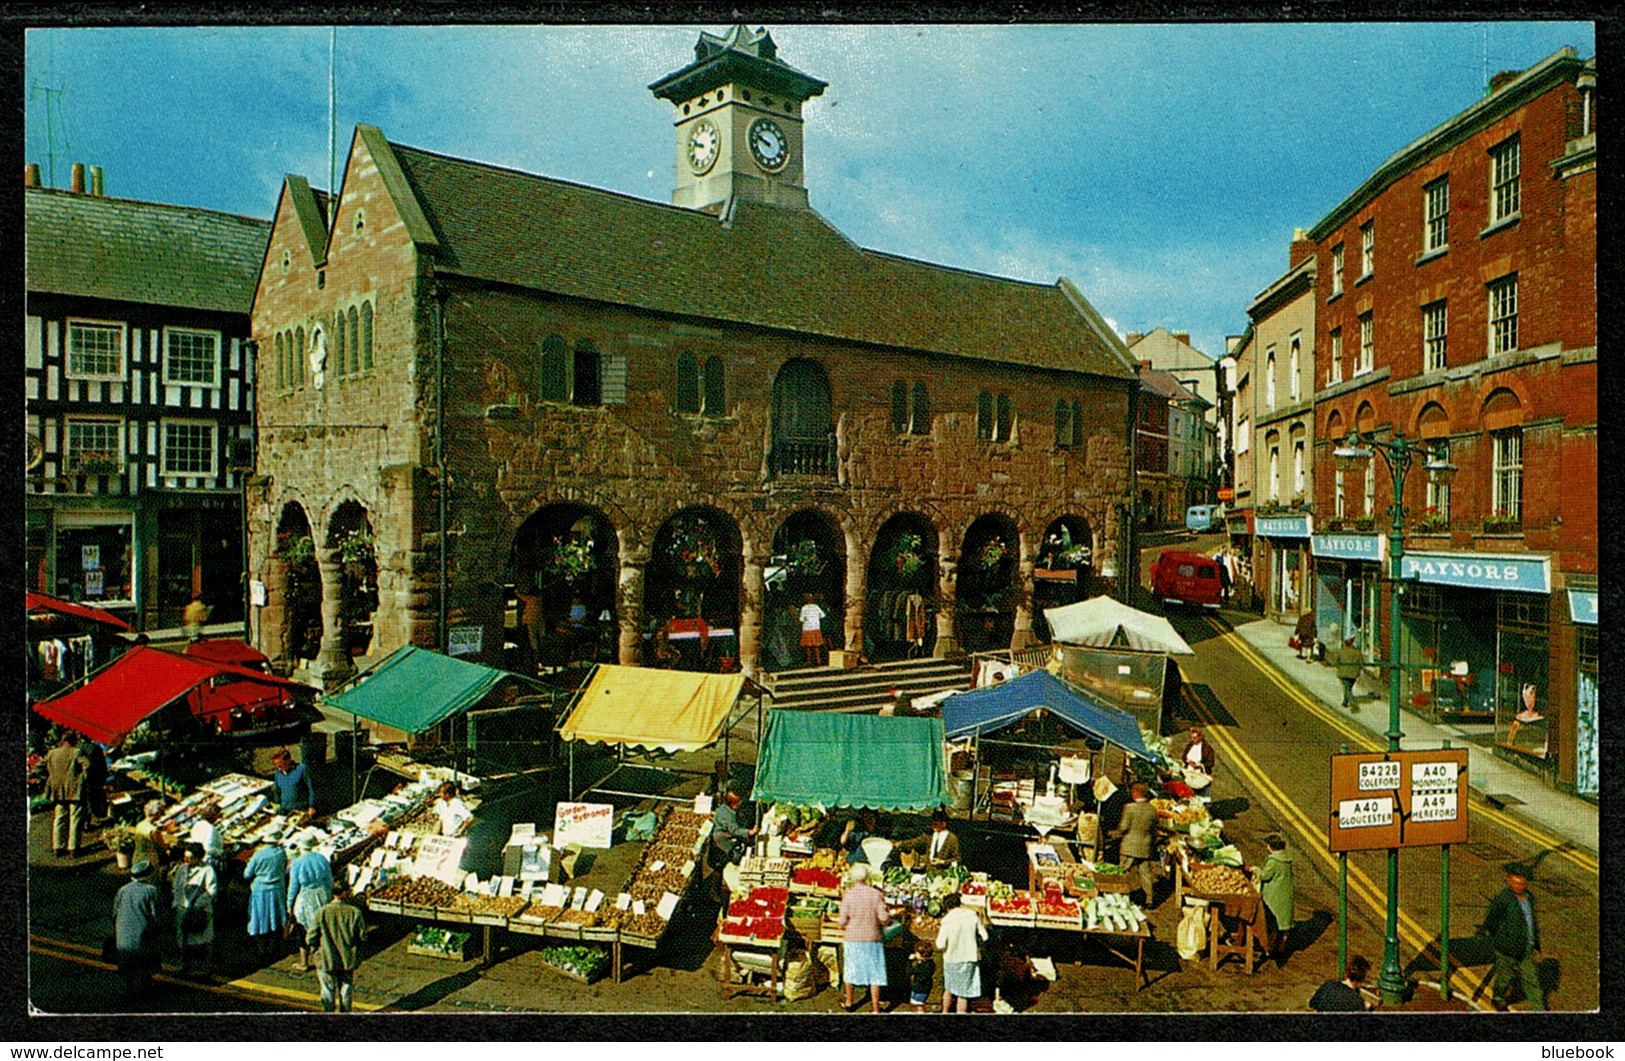 Ref 1246 - Postcard - Market Day - Ross-on-Wye Market Square - Herefordshire - Herefordshire